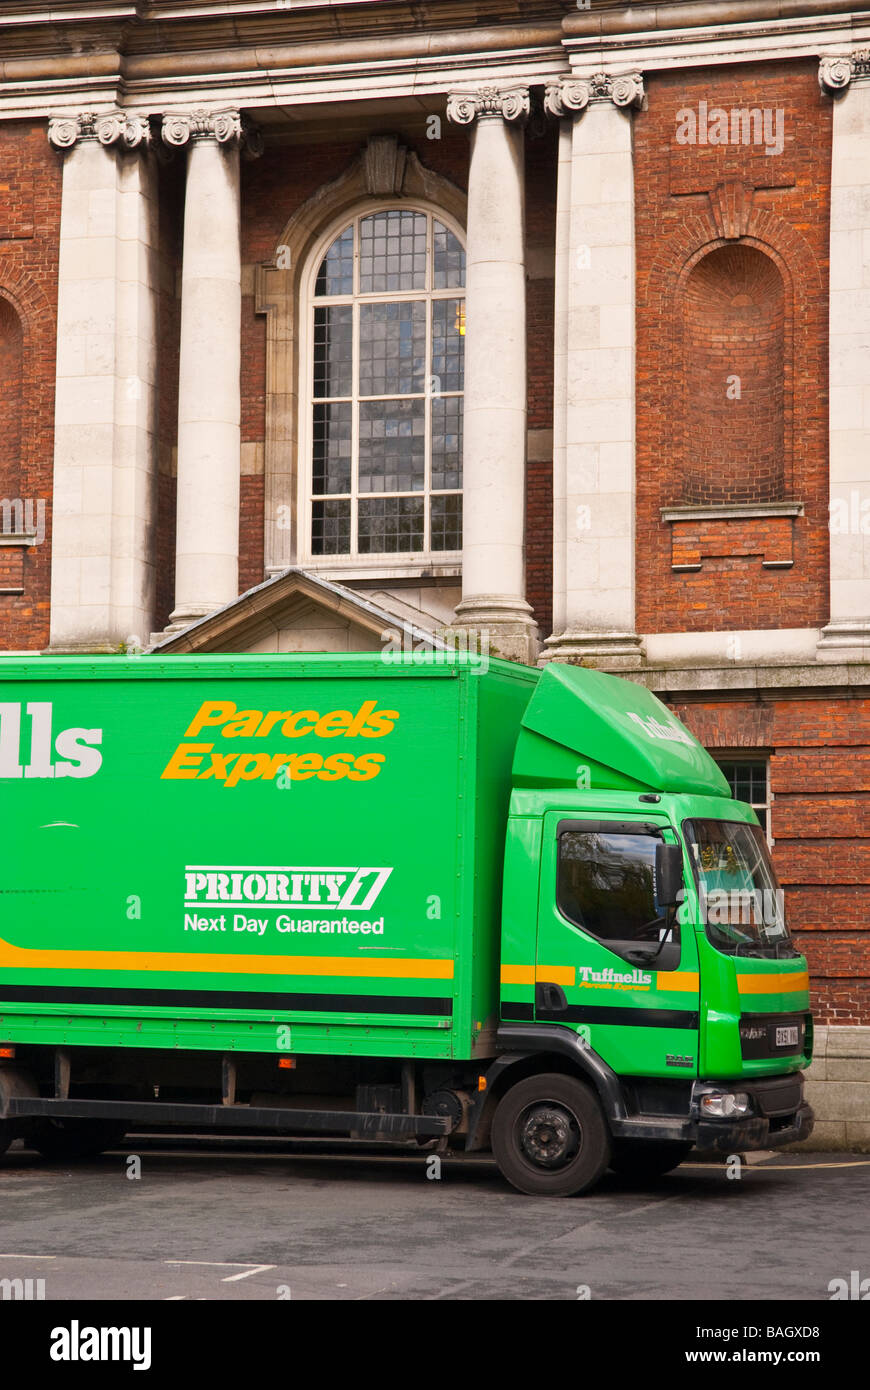 A Tuffnells big green parcel machine lorry van delivering parcels in the uk Stock Photo